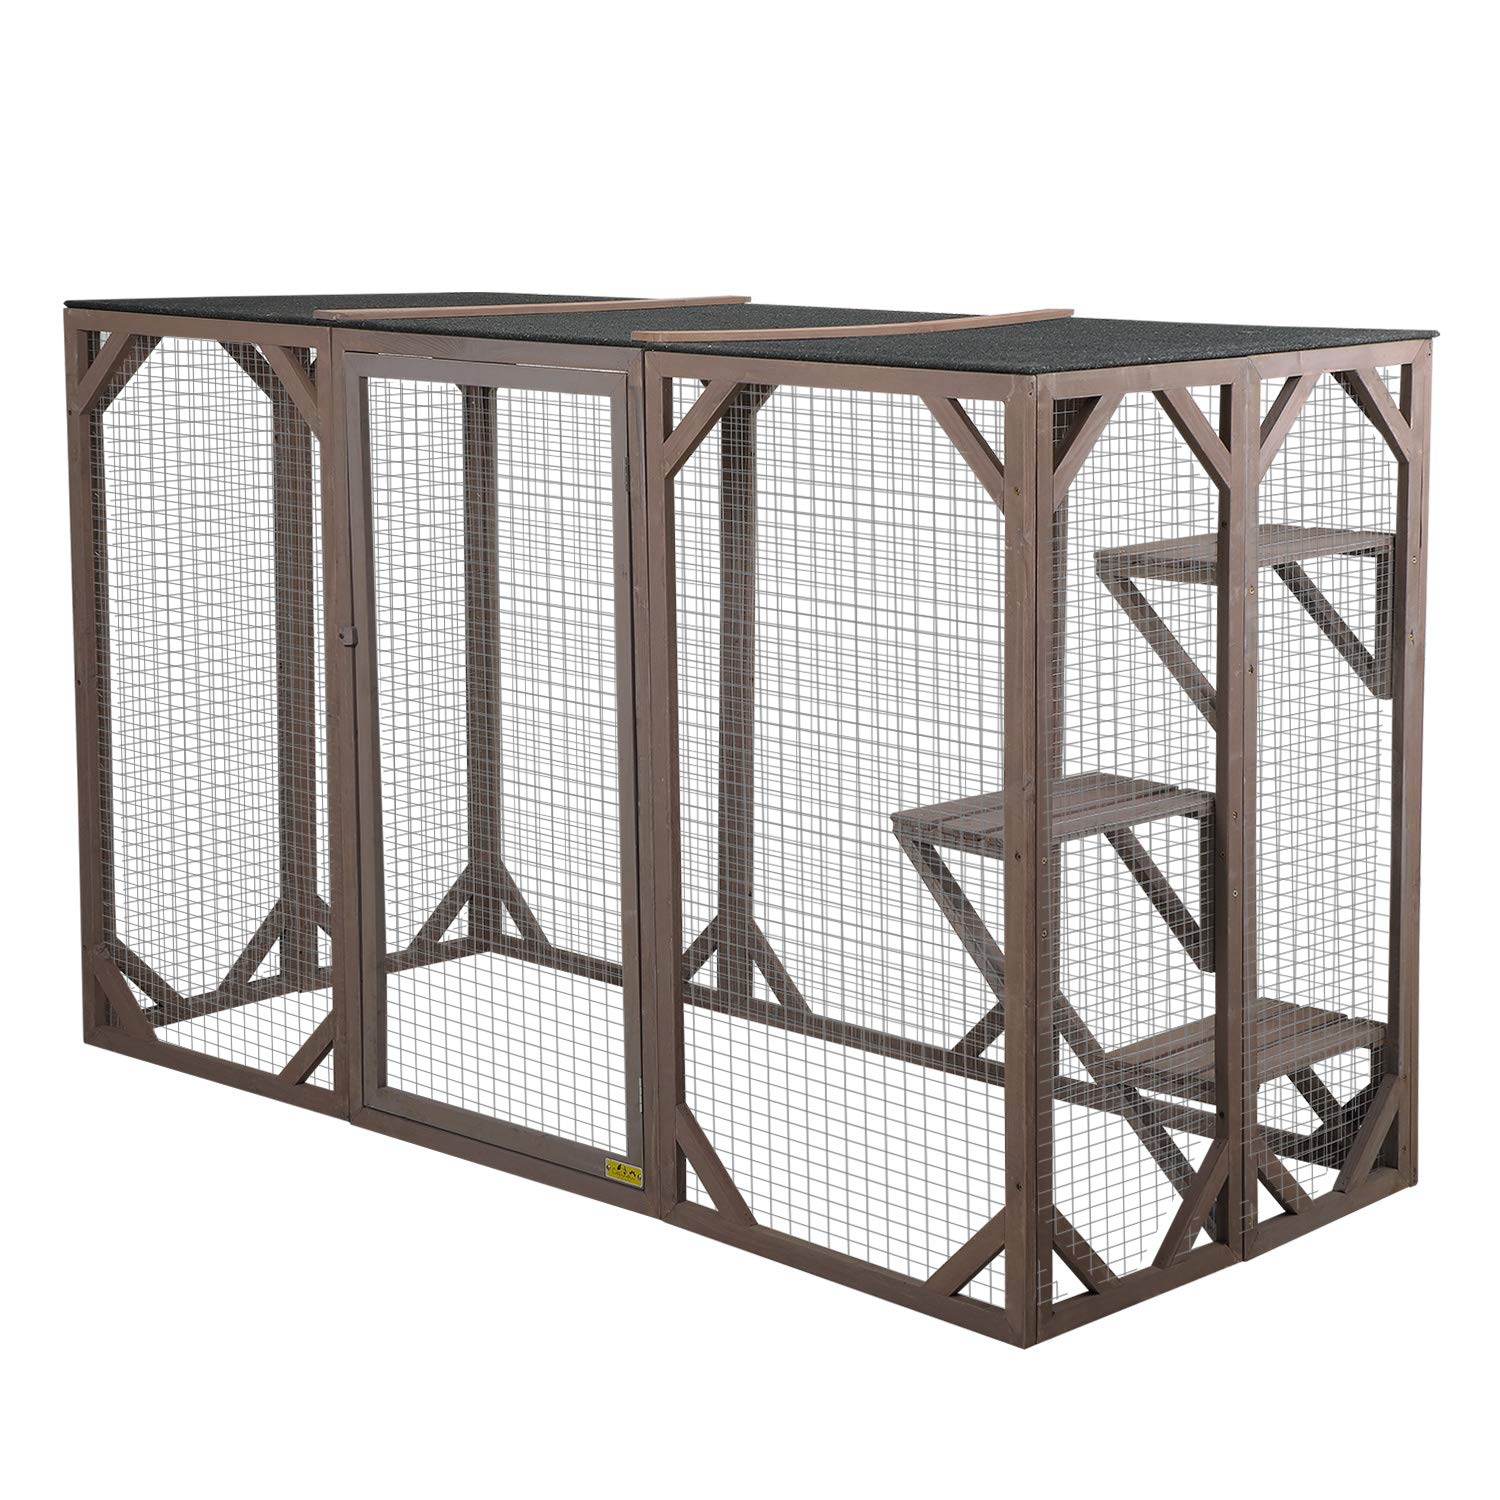 COZIWOW 71” x 32” x 43” Large Wooden Catio Outdoor